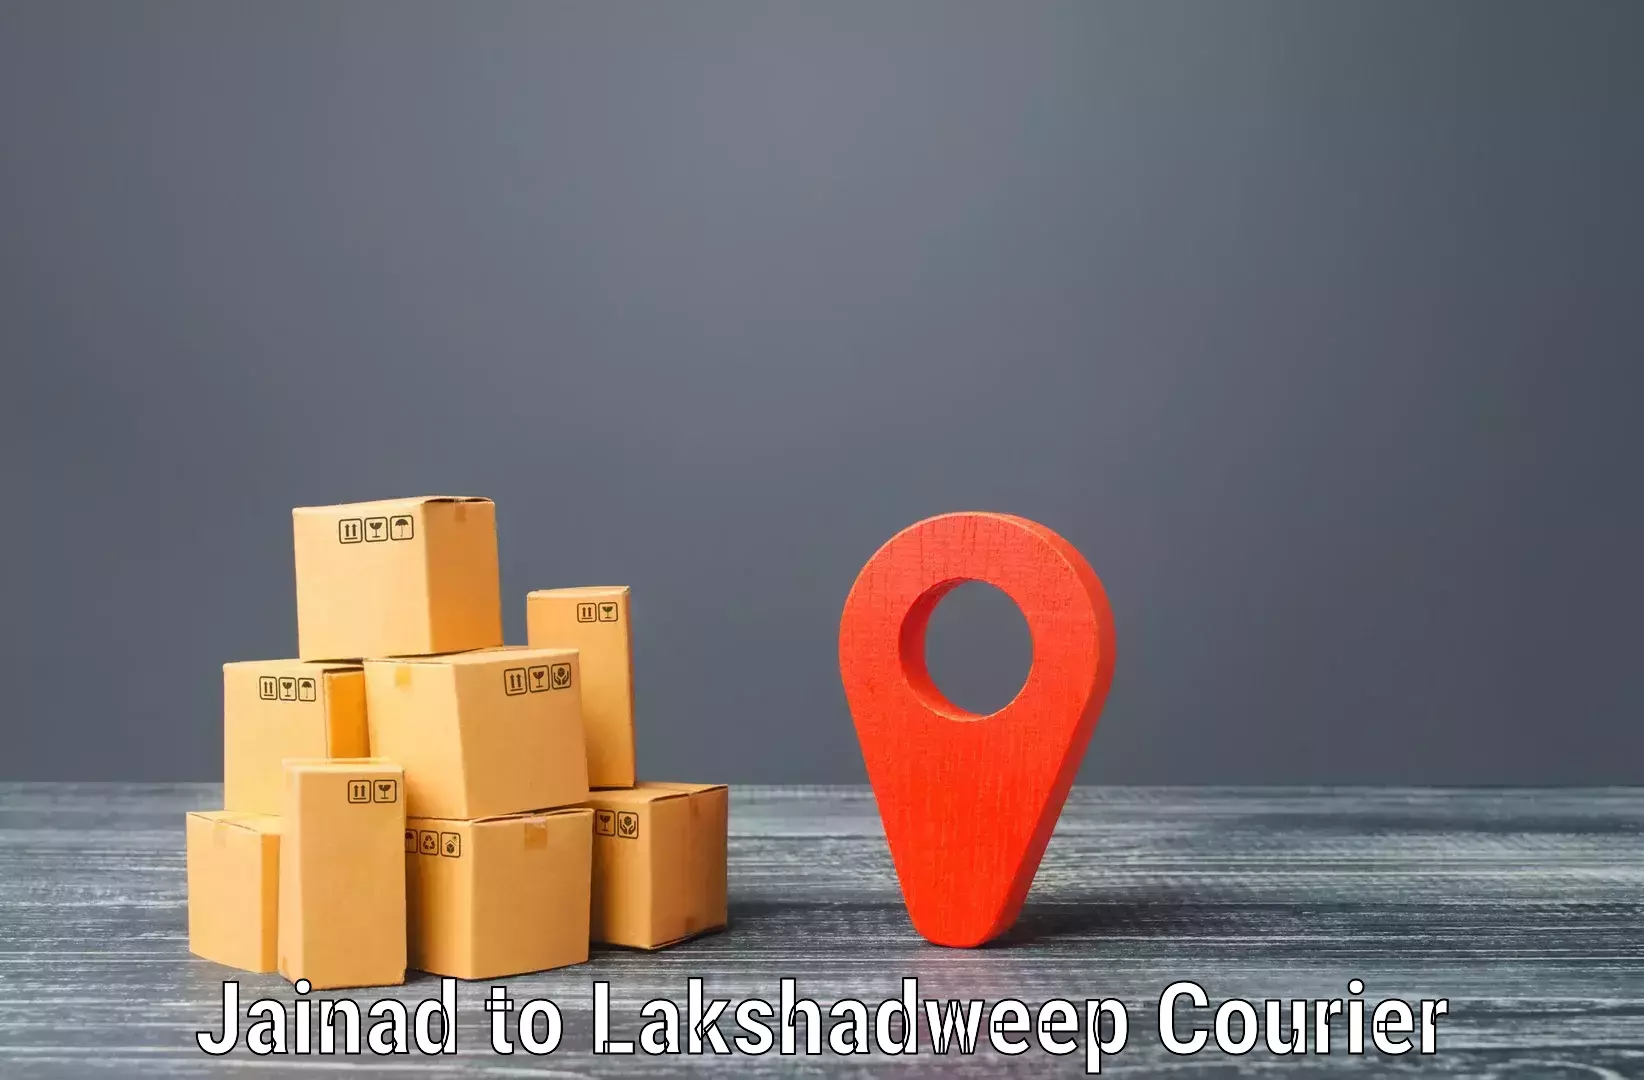 Specialized courier services Jainad to Lakshadweep